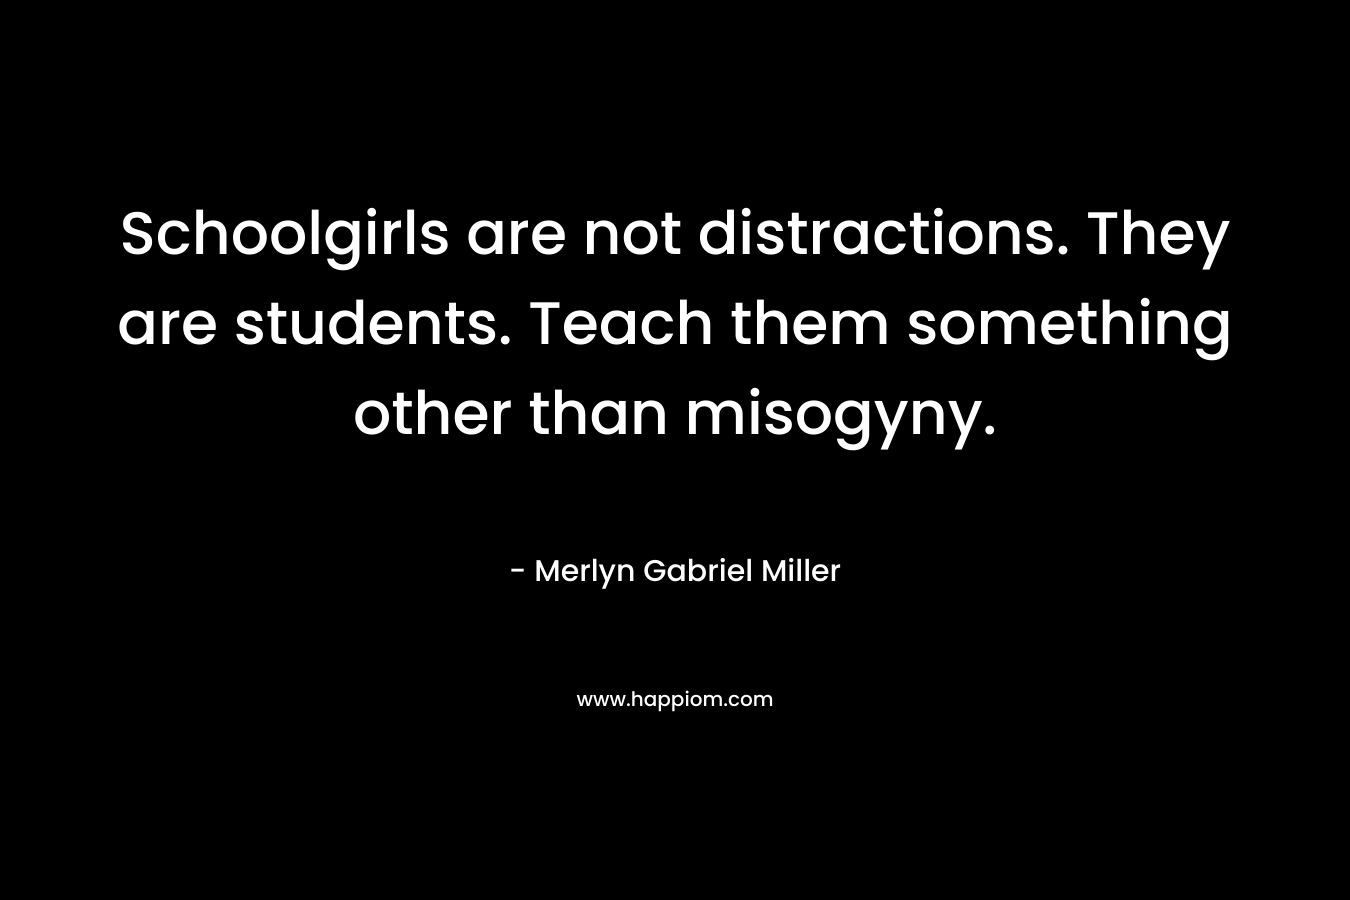 Schoolgirls are not distractions. They are students. Teach them something other than misogyny. – Merlyn Gabriel Miller